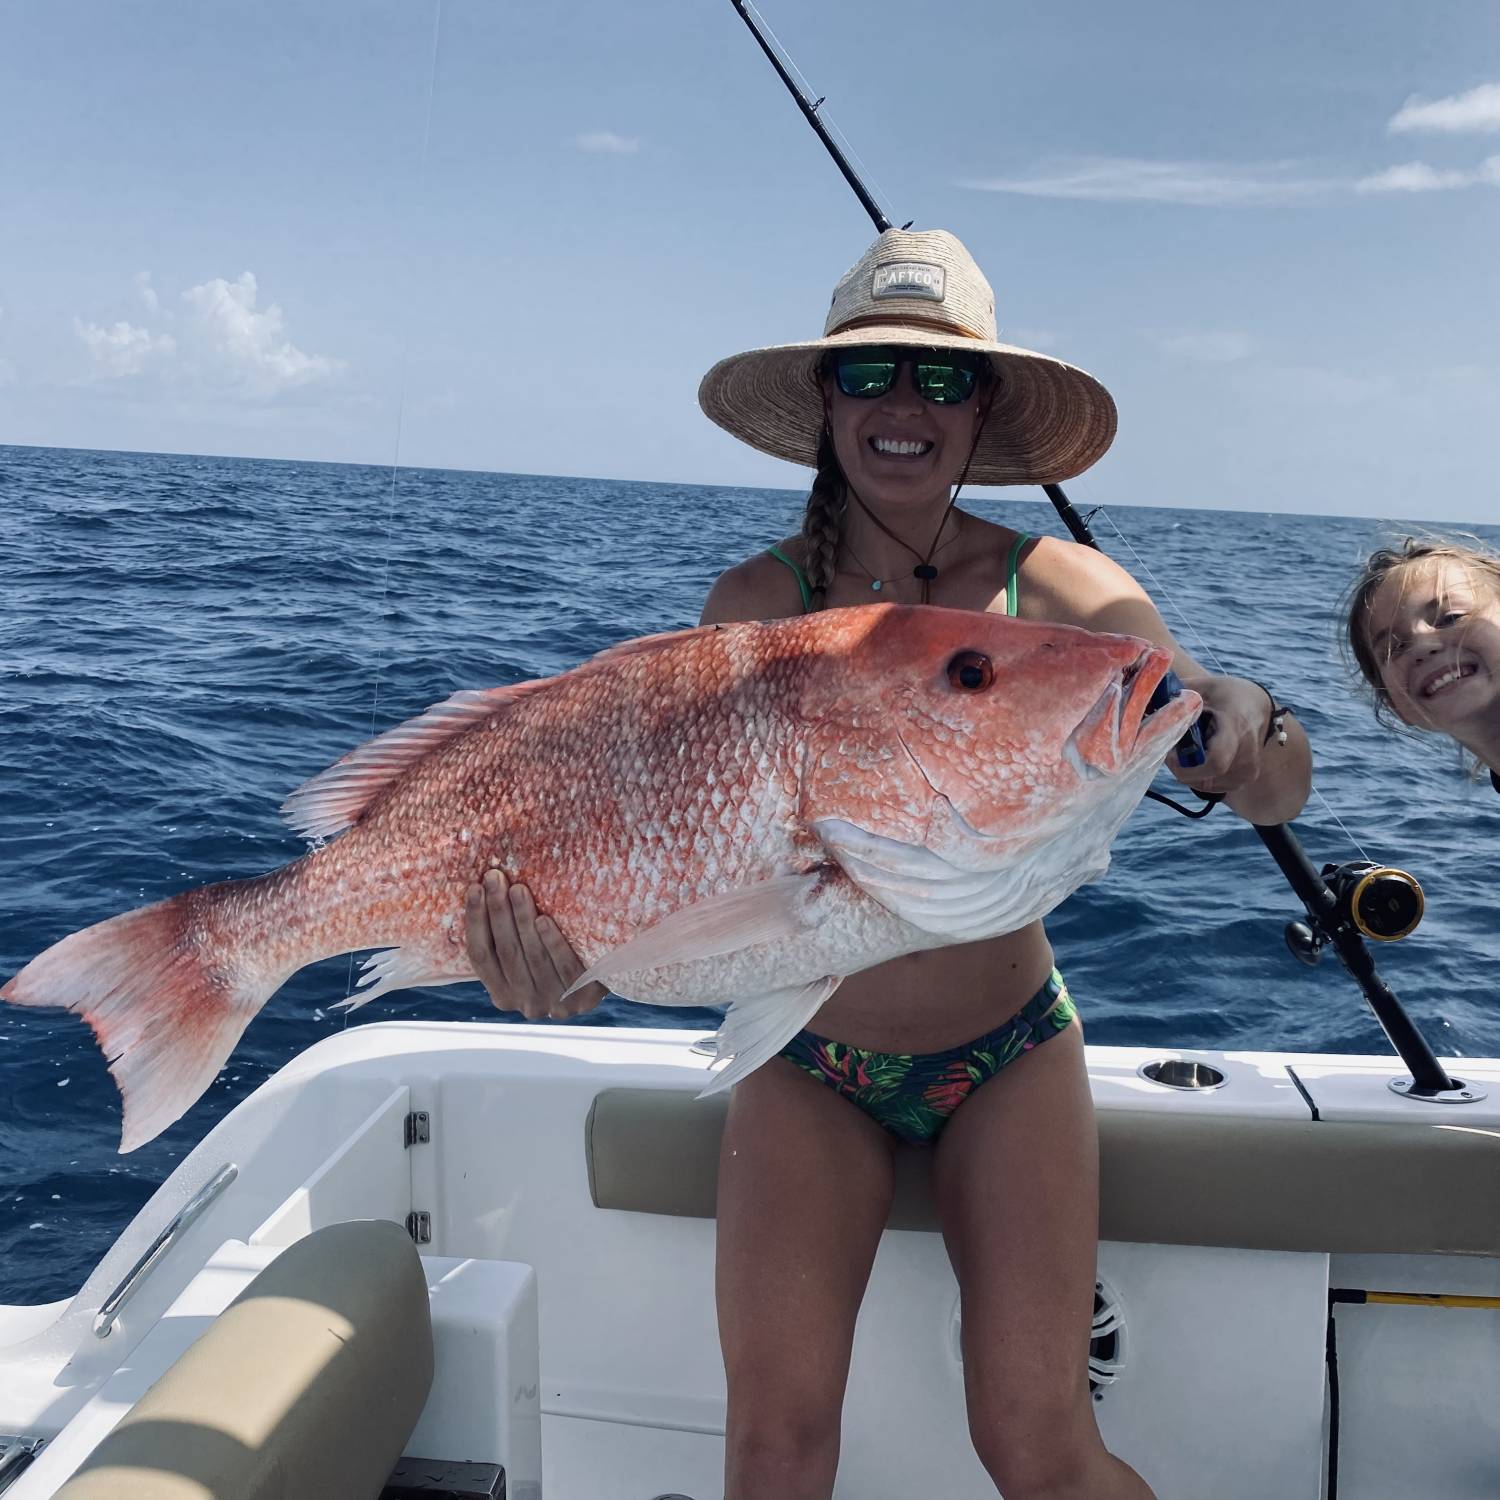 Title: 35 inch red snapper - On board their Sportsman Open 242 Center Console - Location: Alligator point, Fl. Participating in the Photo Contest #SportsmanAugust